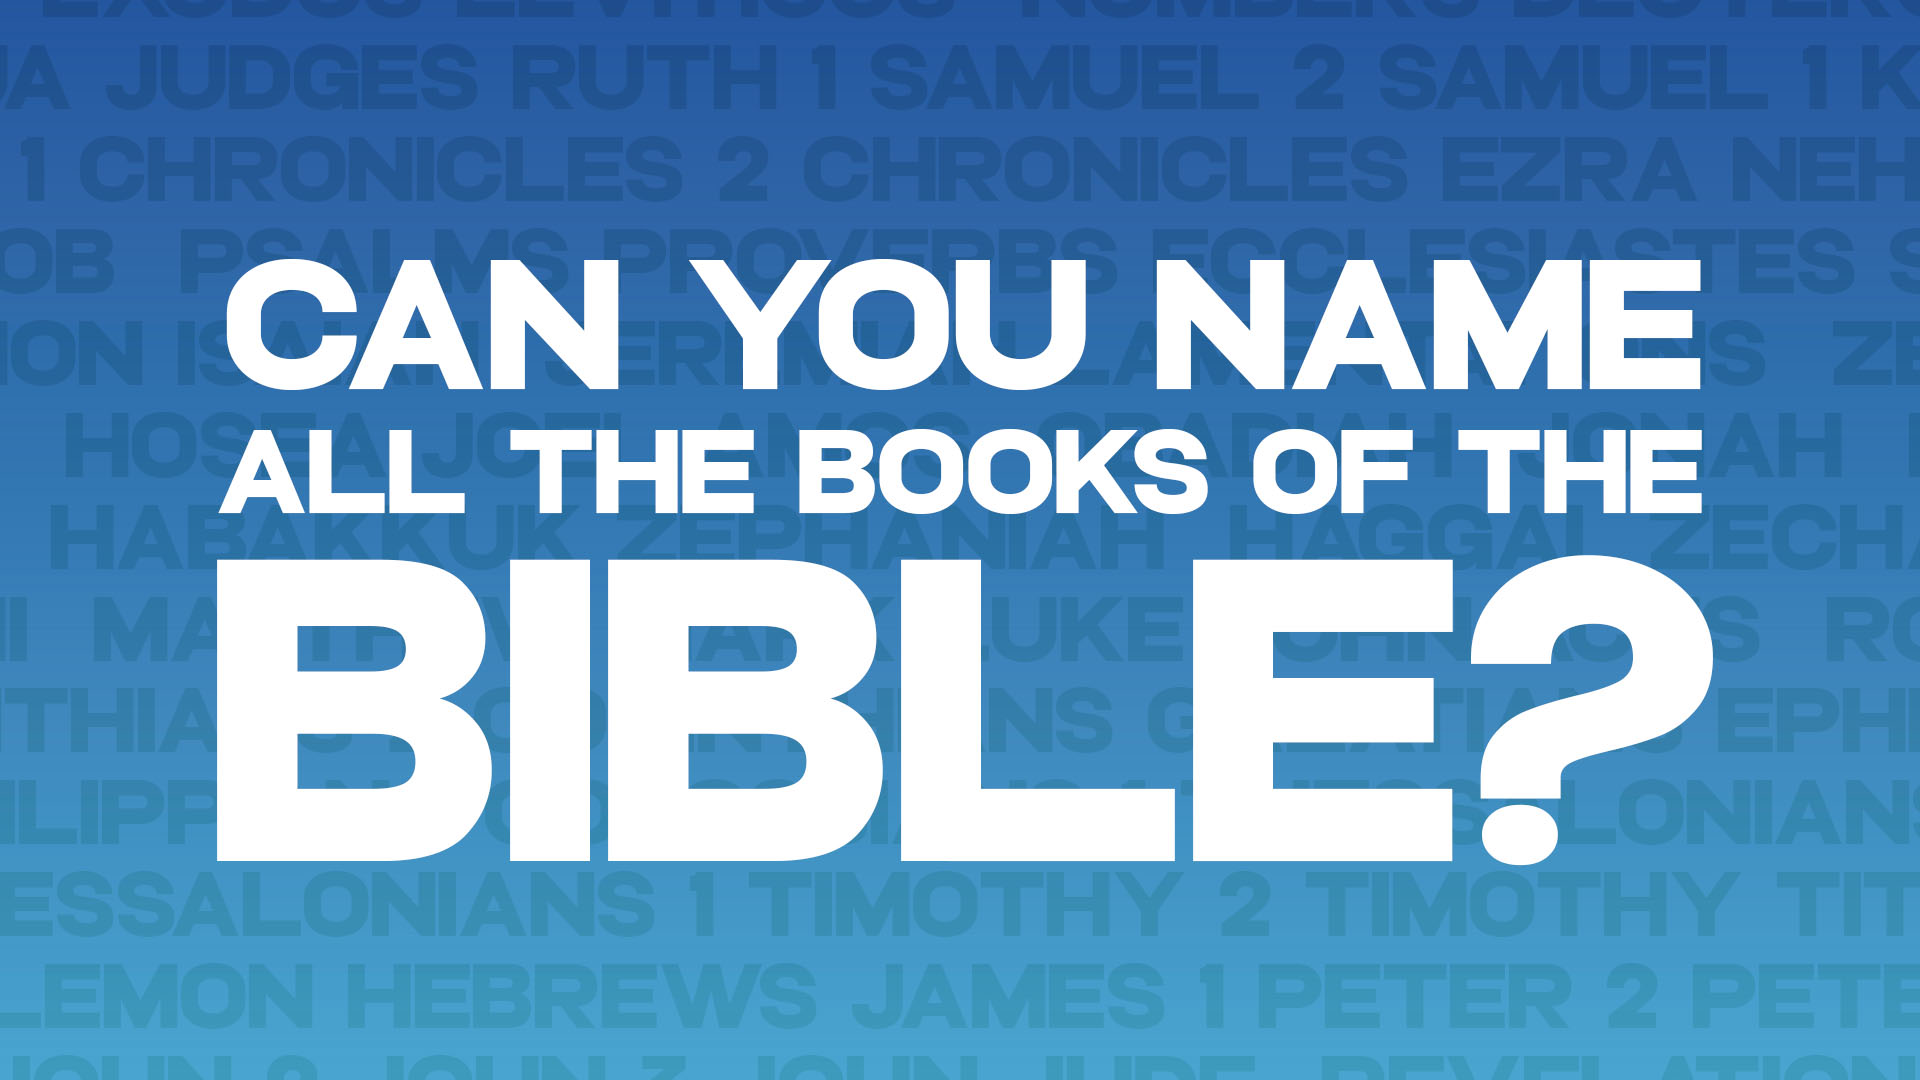 Can you name all the books of the bible?